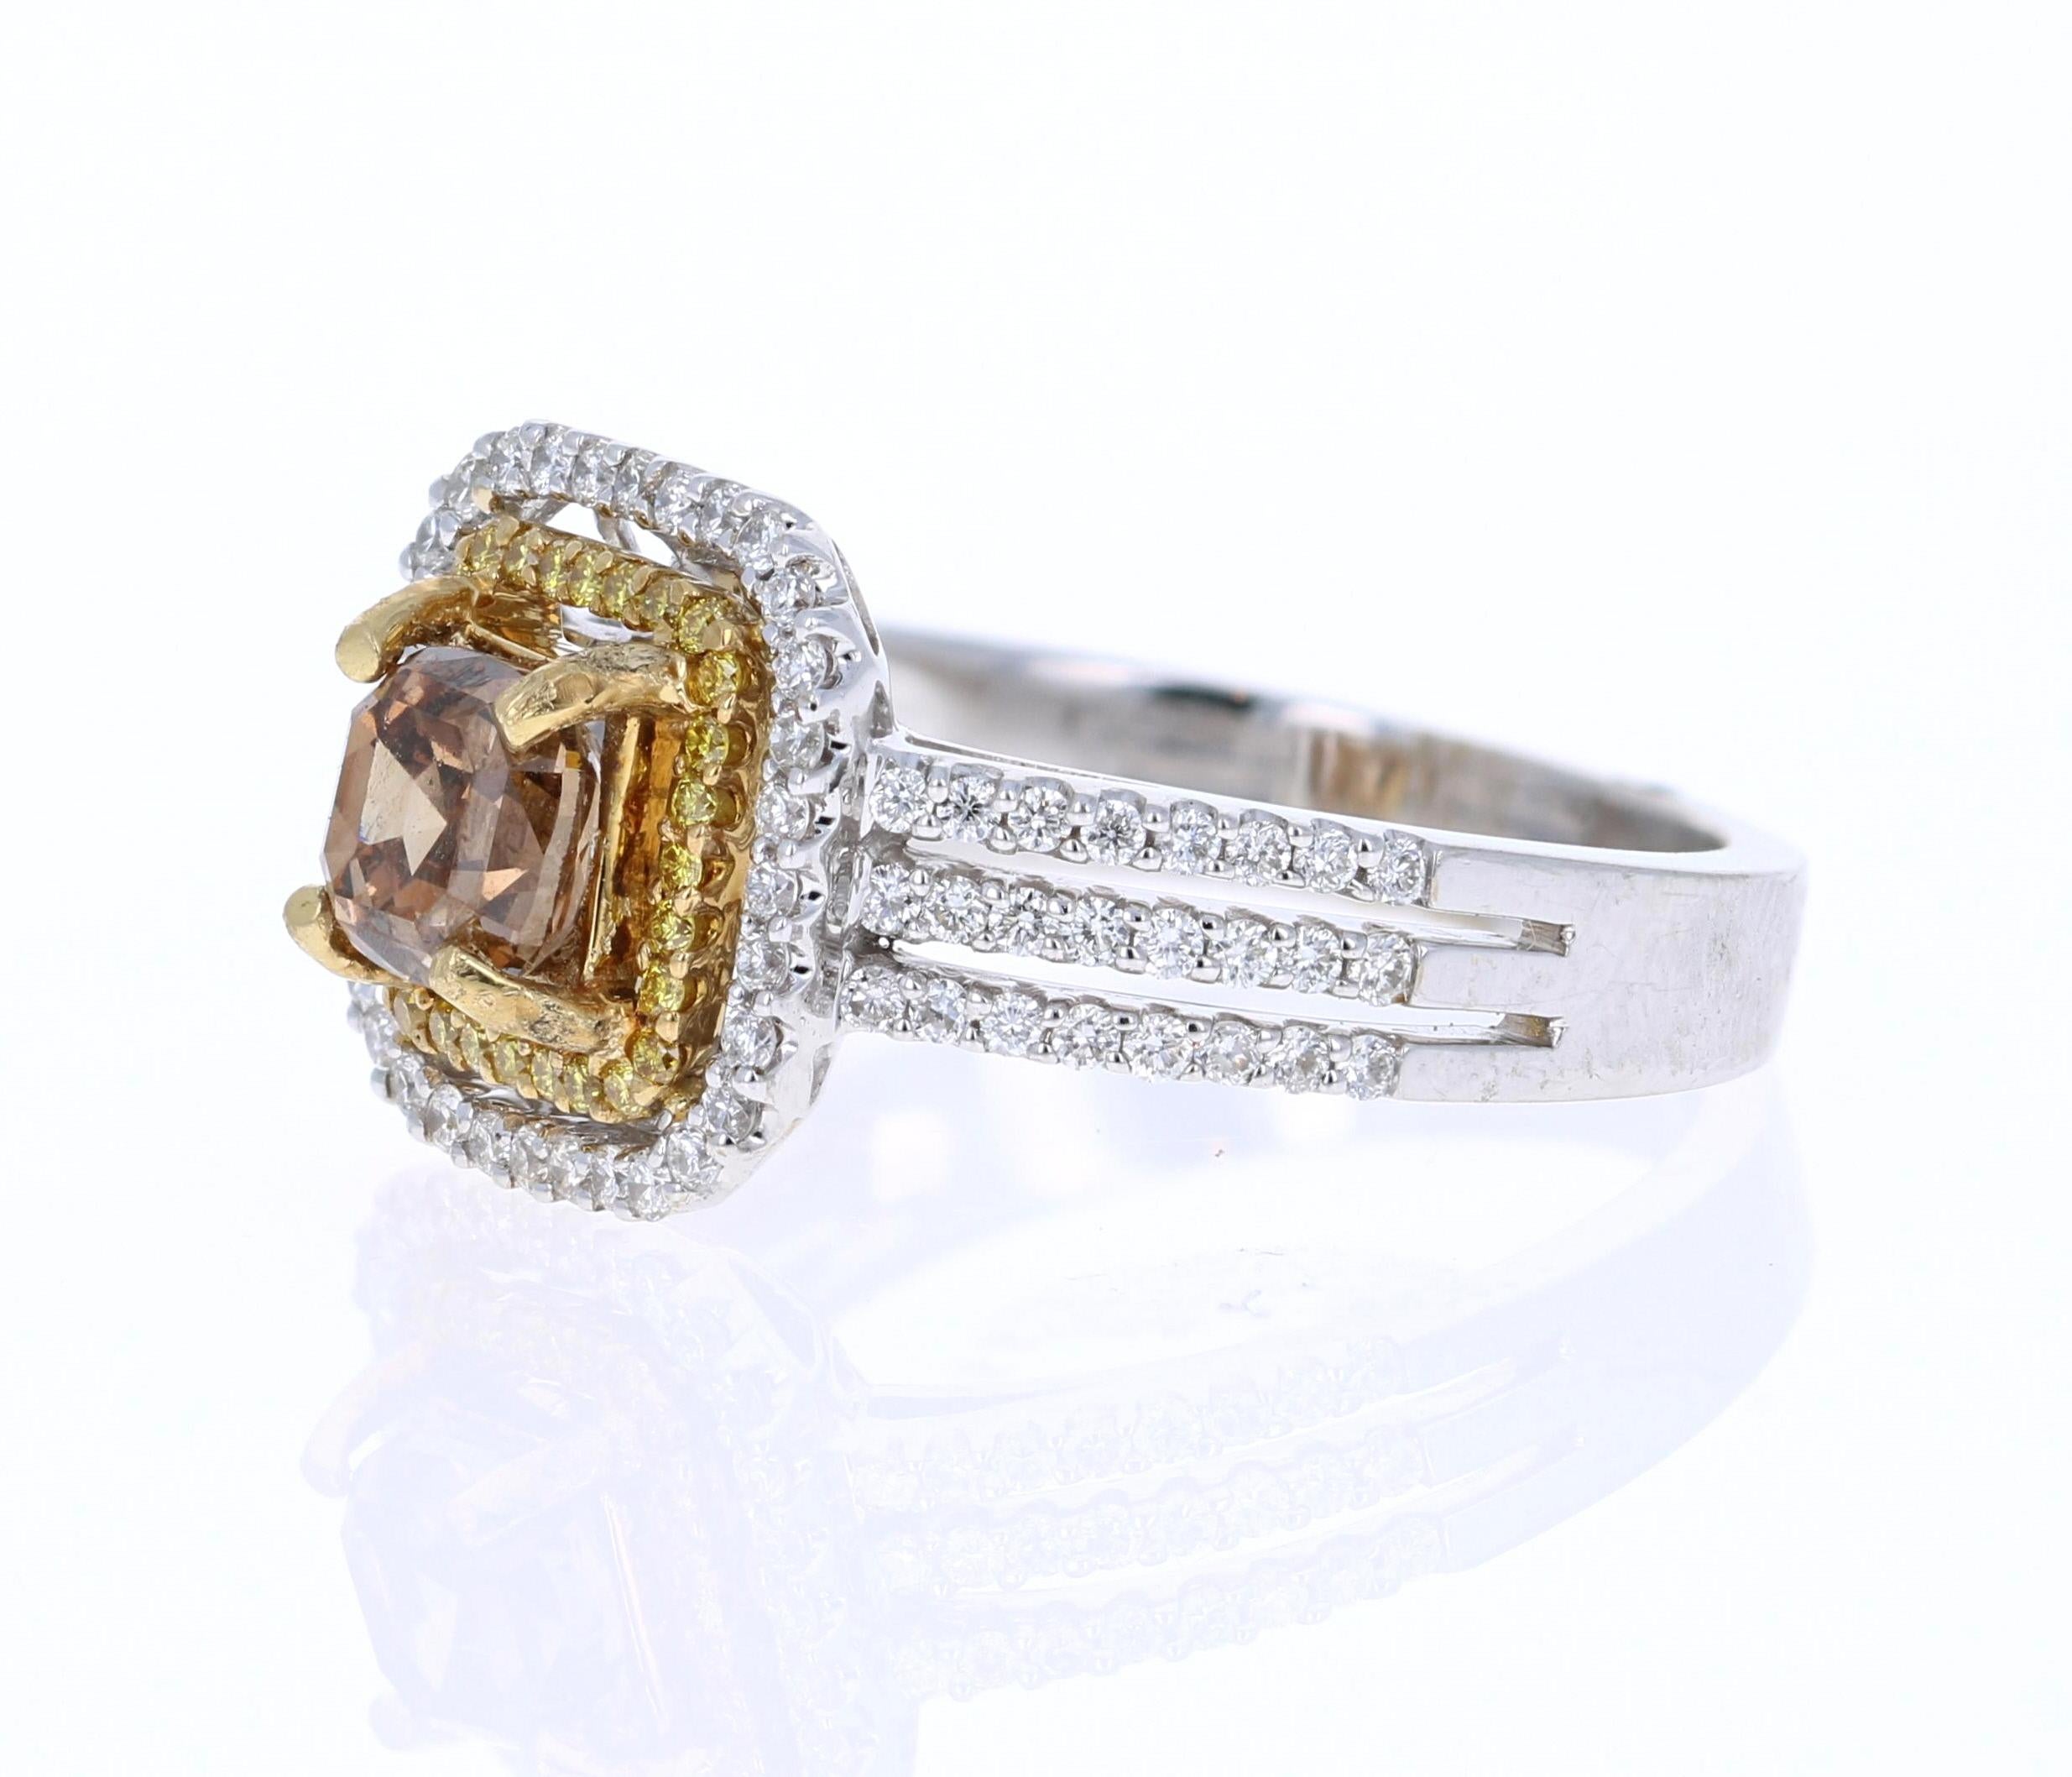 A great alternative to a typical diamond engagement ring!

This ring has a 1.03 Carat Asscher Cut Natural Champagne Diamond Clarity (SI1) which is surrounded by 88 Round Cut Diamonds that weigh 0.45 Carats and also 28 Yellow Diamonds that weigh 0.15